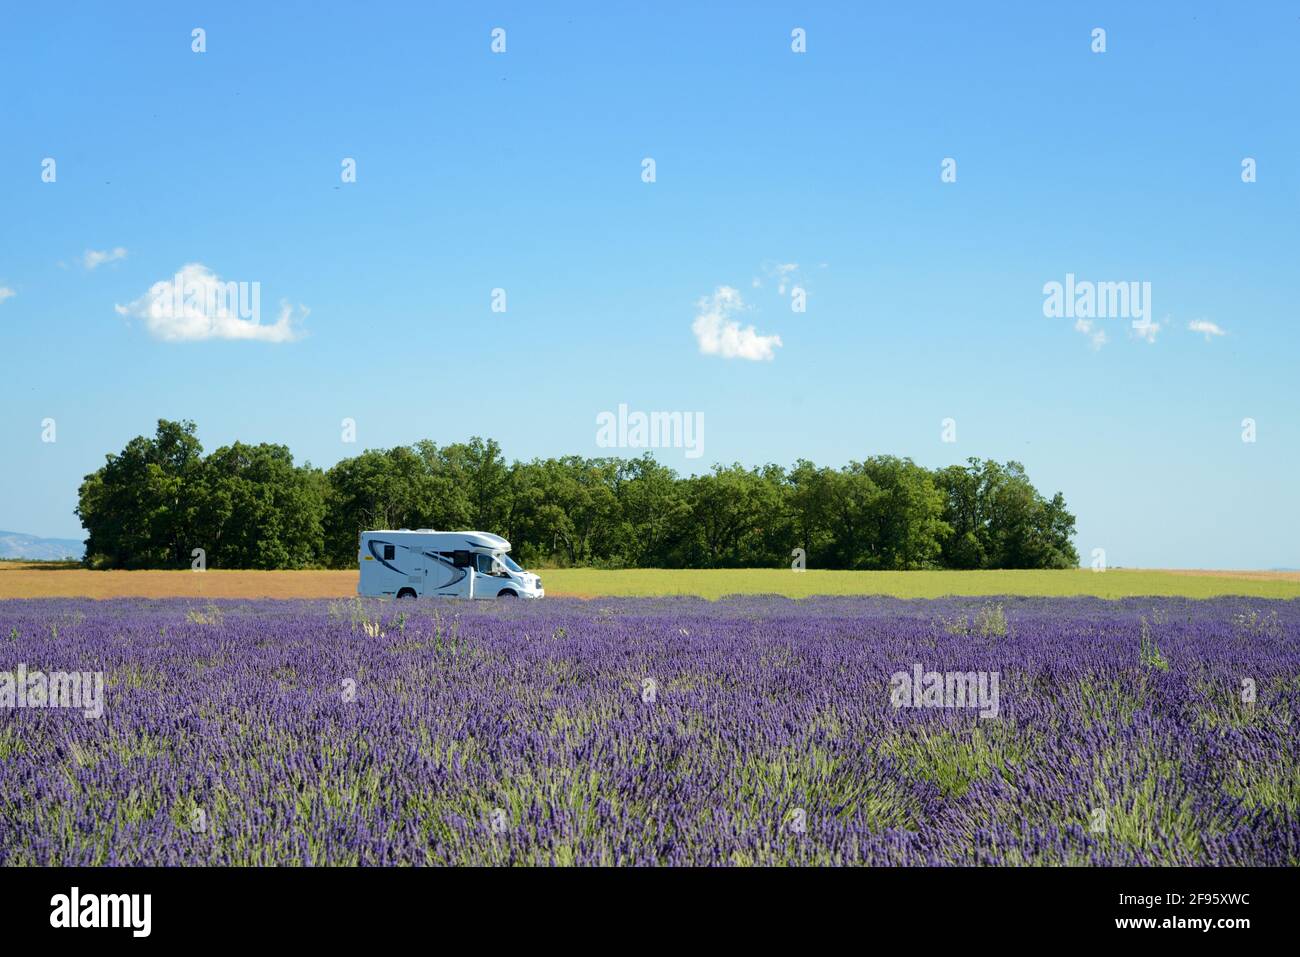 Single Camper Van, Motorhome, Recreational Vehicle or Camping Car Driving Through Lavender Fields Valensole Plateau Provence France Stock Photo